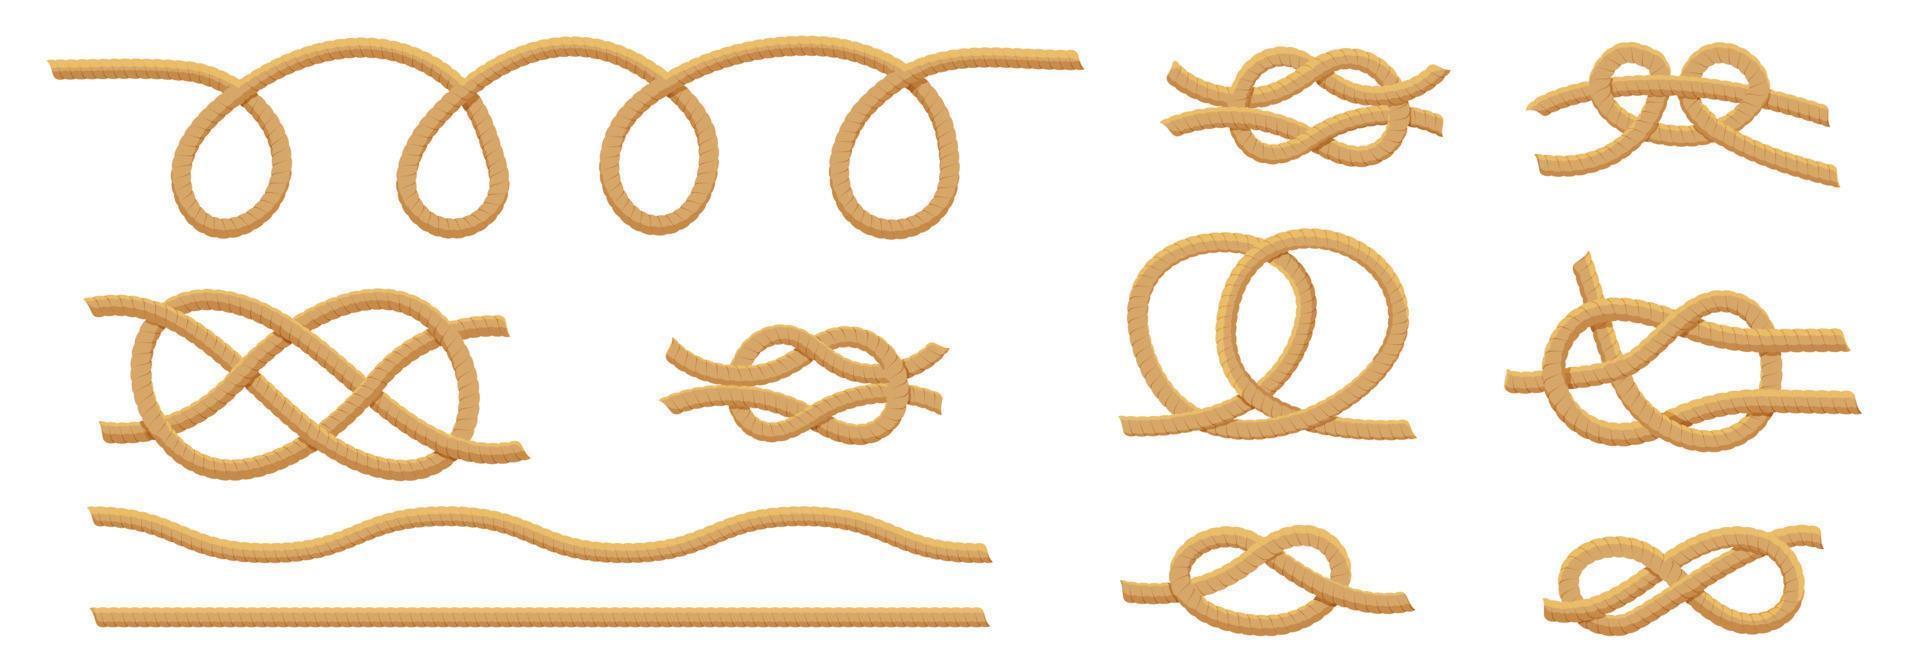 Marine rope knots. Vector illustration of jute patterns isolated on white. Antique cords of various shapes. Seamless brown ropes